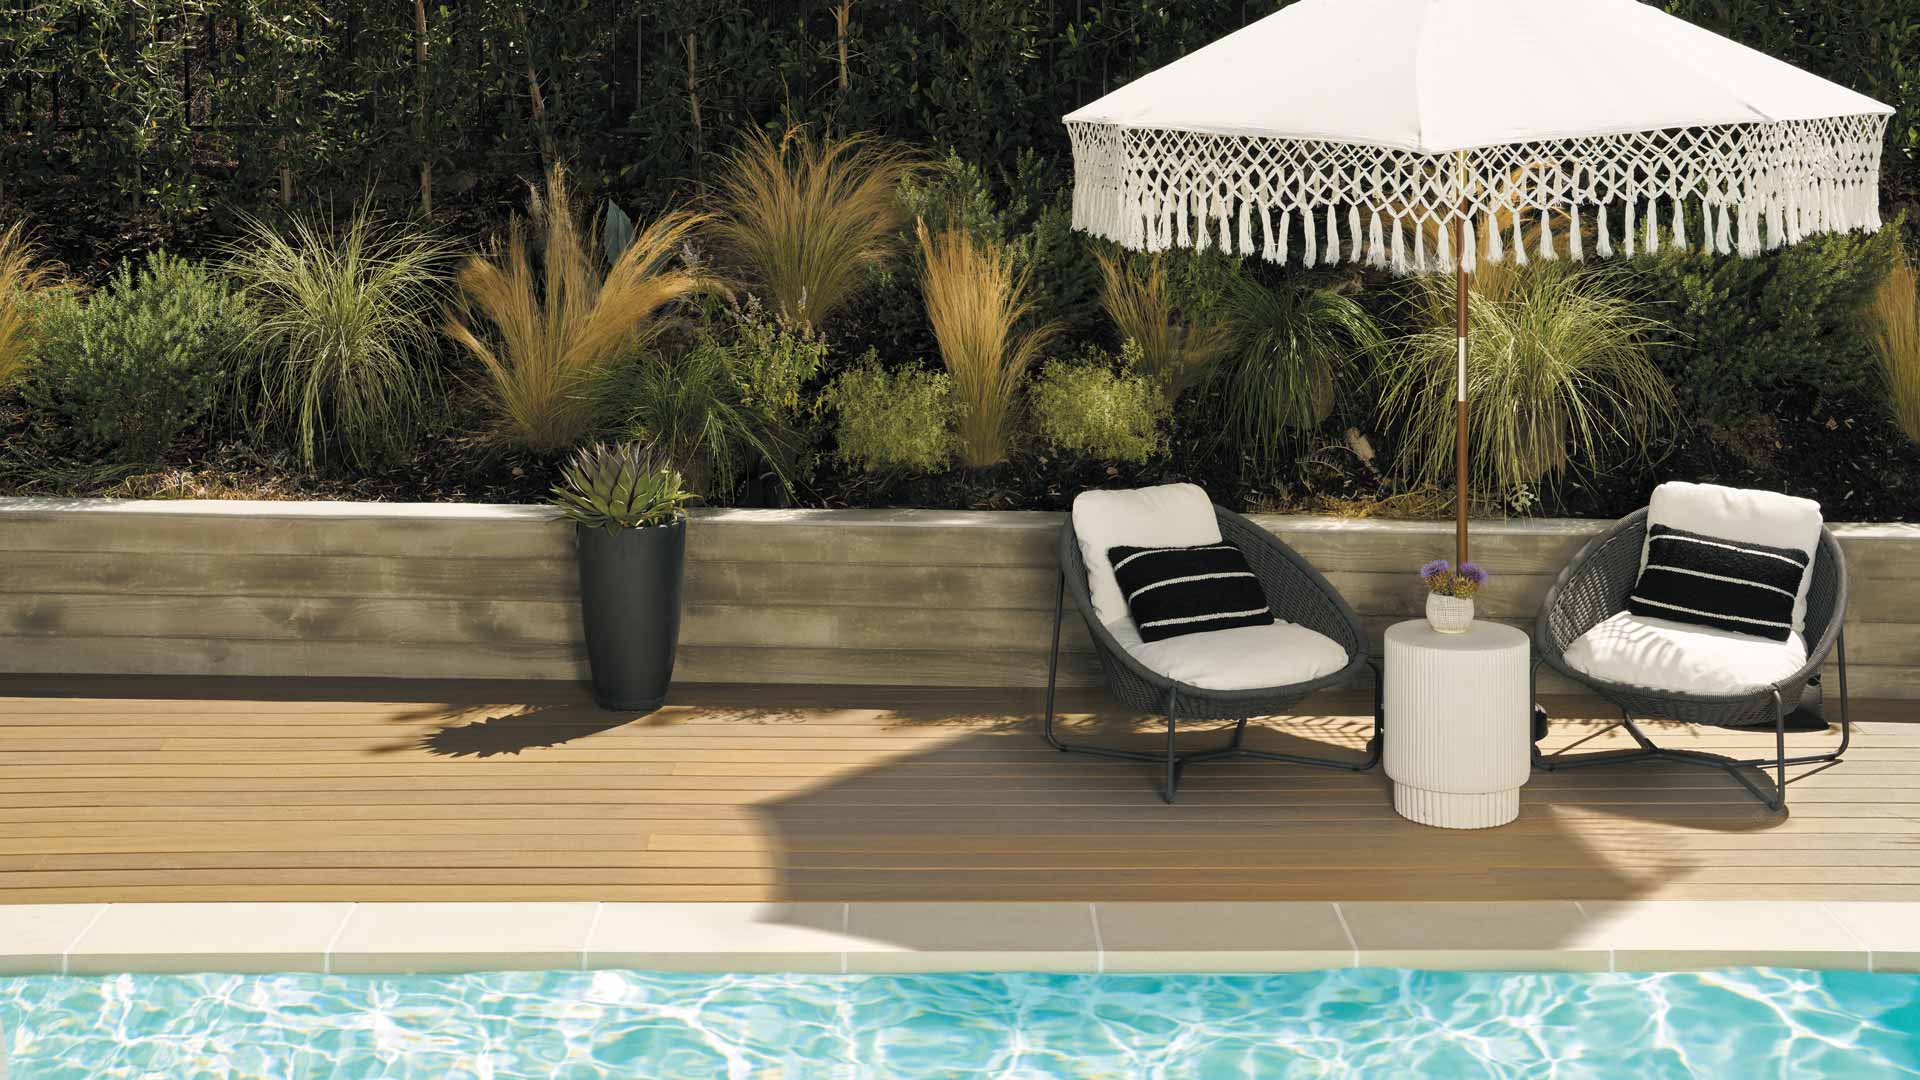 Two wicker chairs under an umbrella on a pool deck built with TimberTech Composite Tigerwood boards